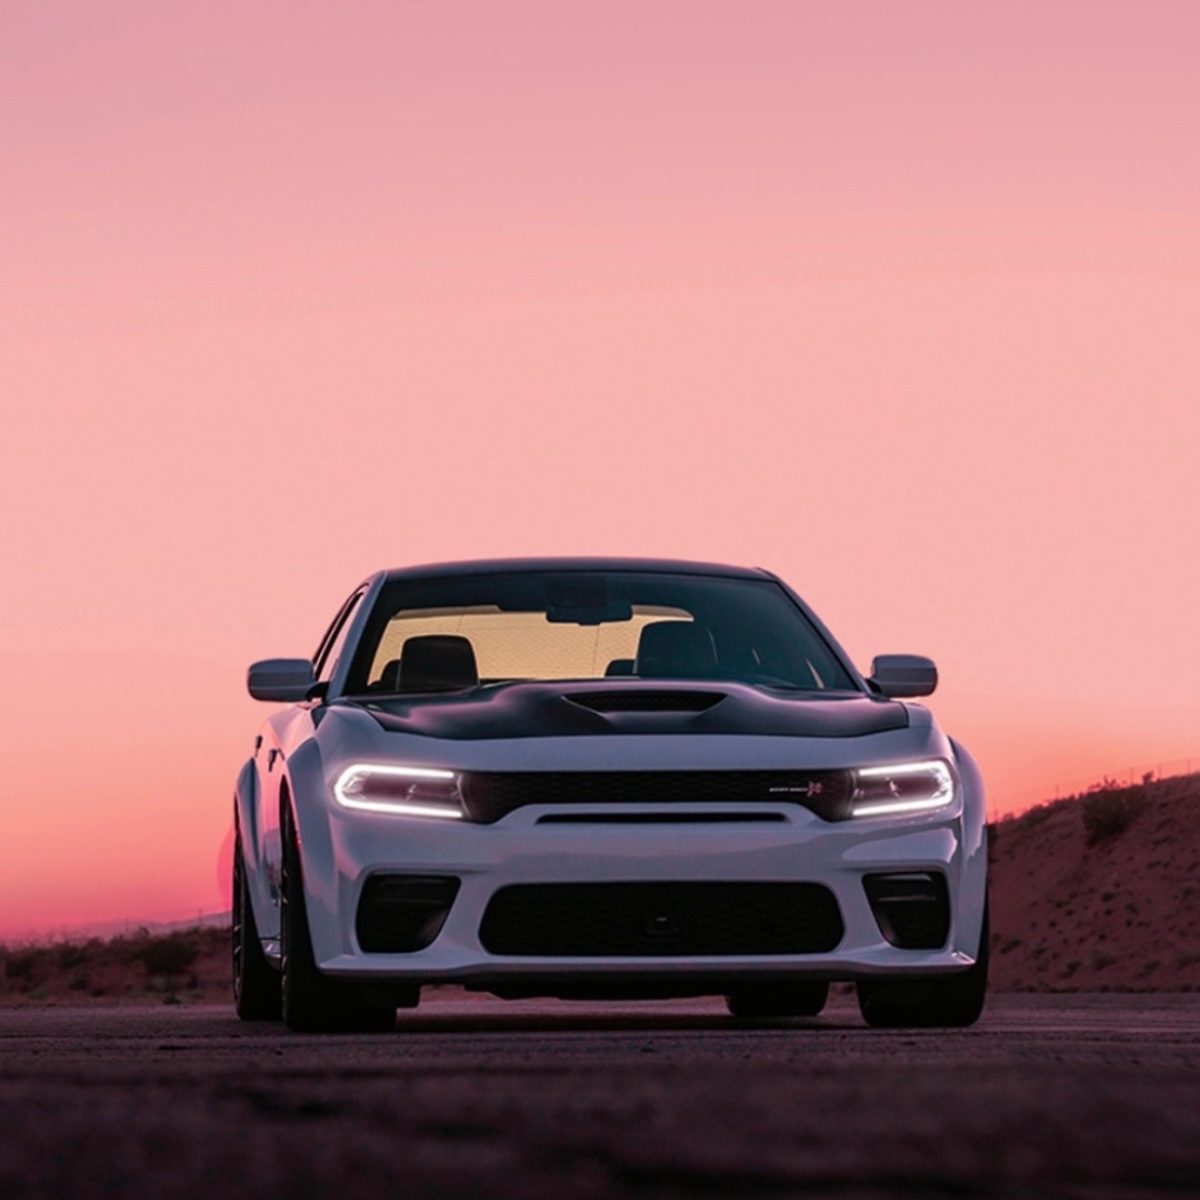 Elevate your time on the road this season with an adventurous #DodgeCharger. Speed, style, and impressive power! Visit us today to get your hands on your thrilling new ride. #CarCrushWednesday #Dodge #DodgeUSA